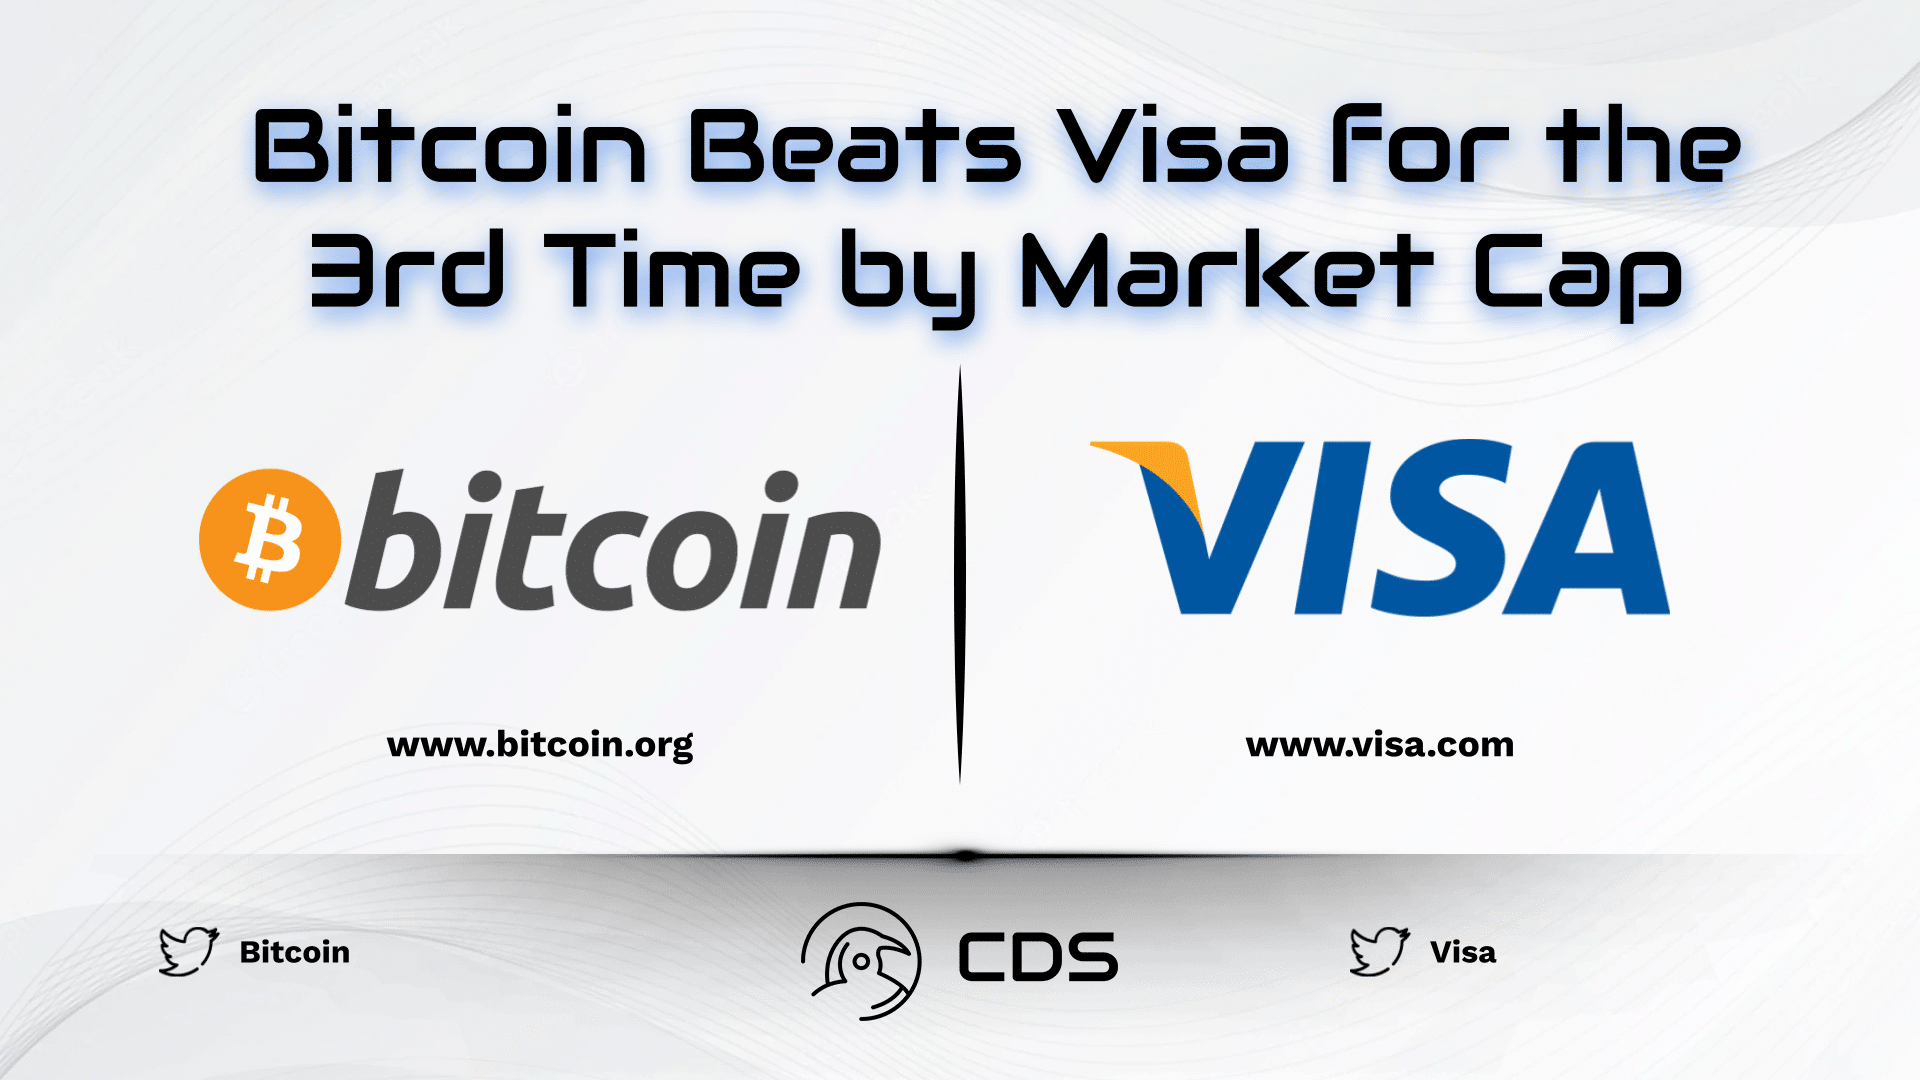 Bitcoin Beats Visa for the 3rd Time by Market Cap